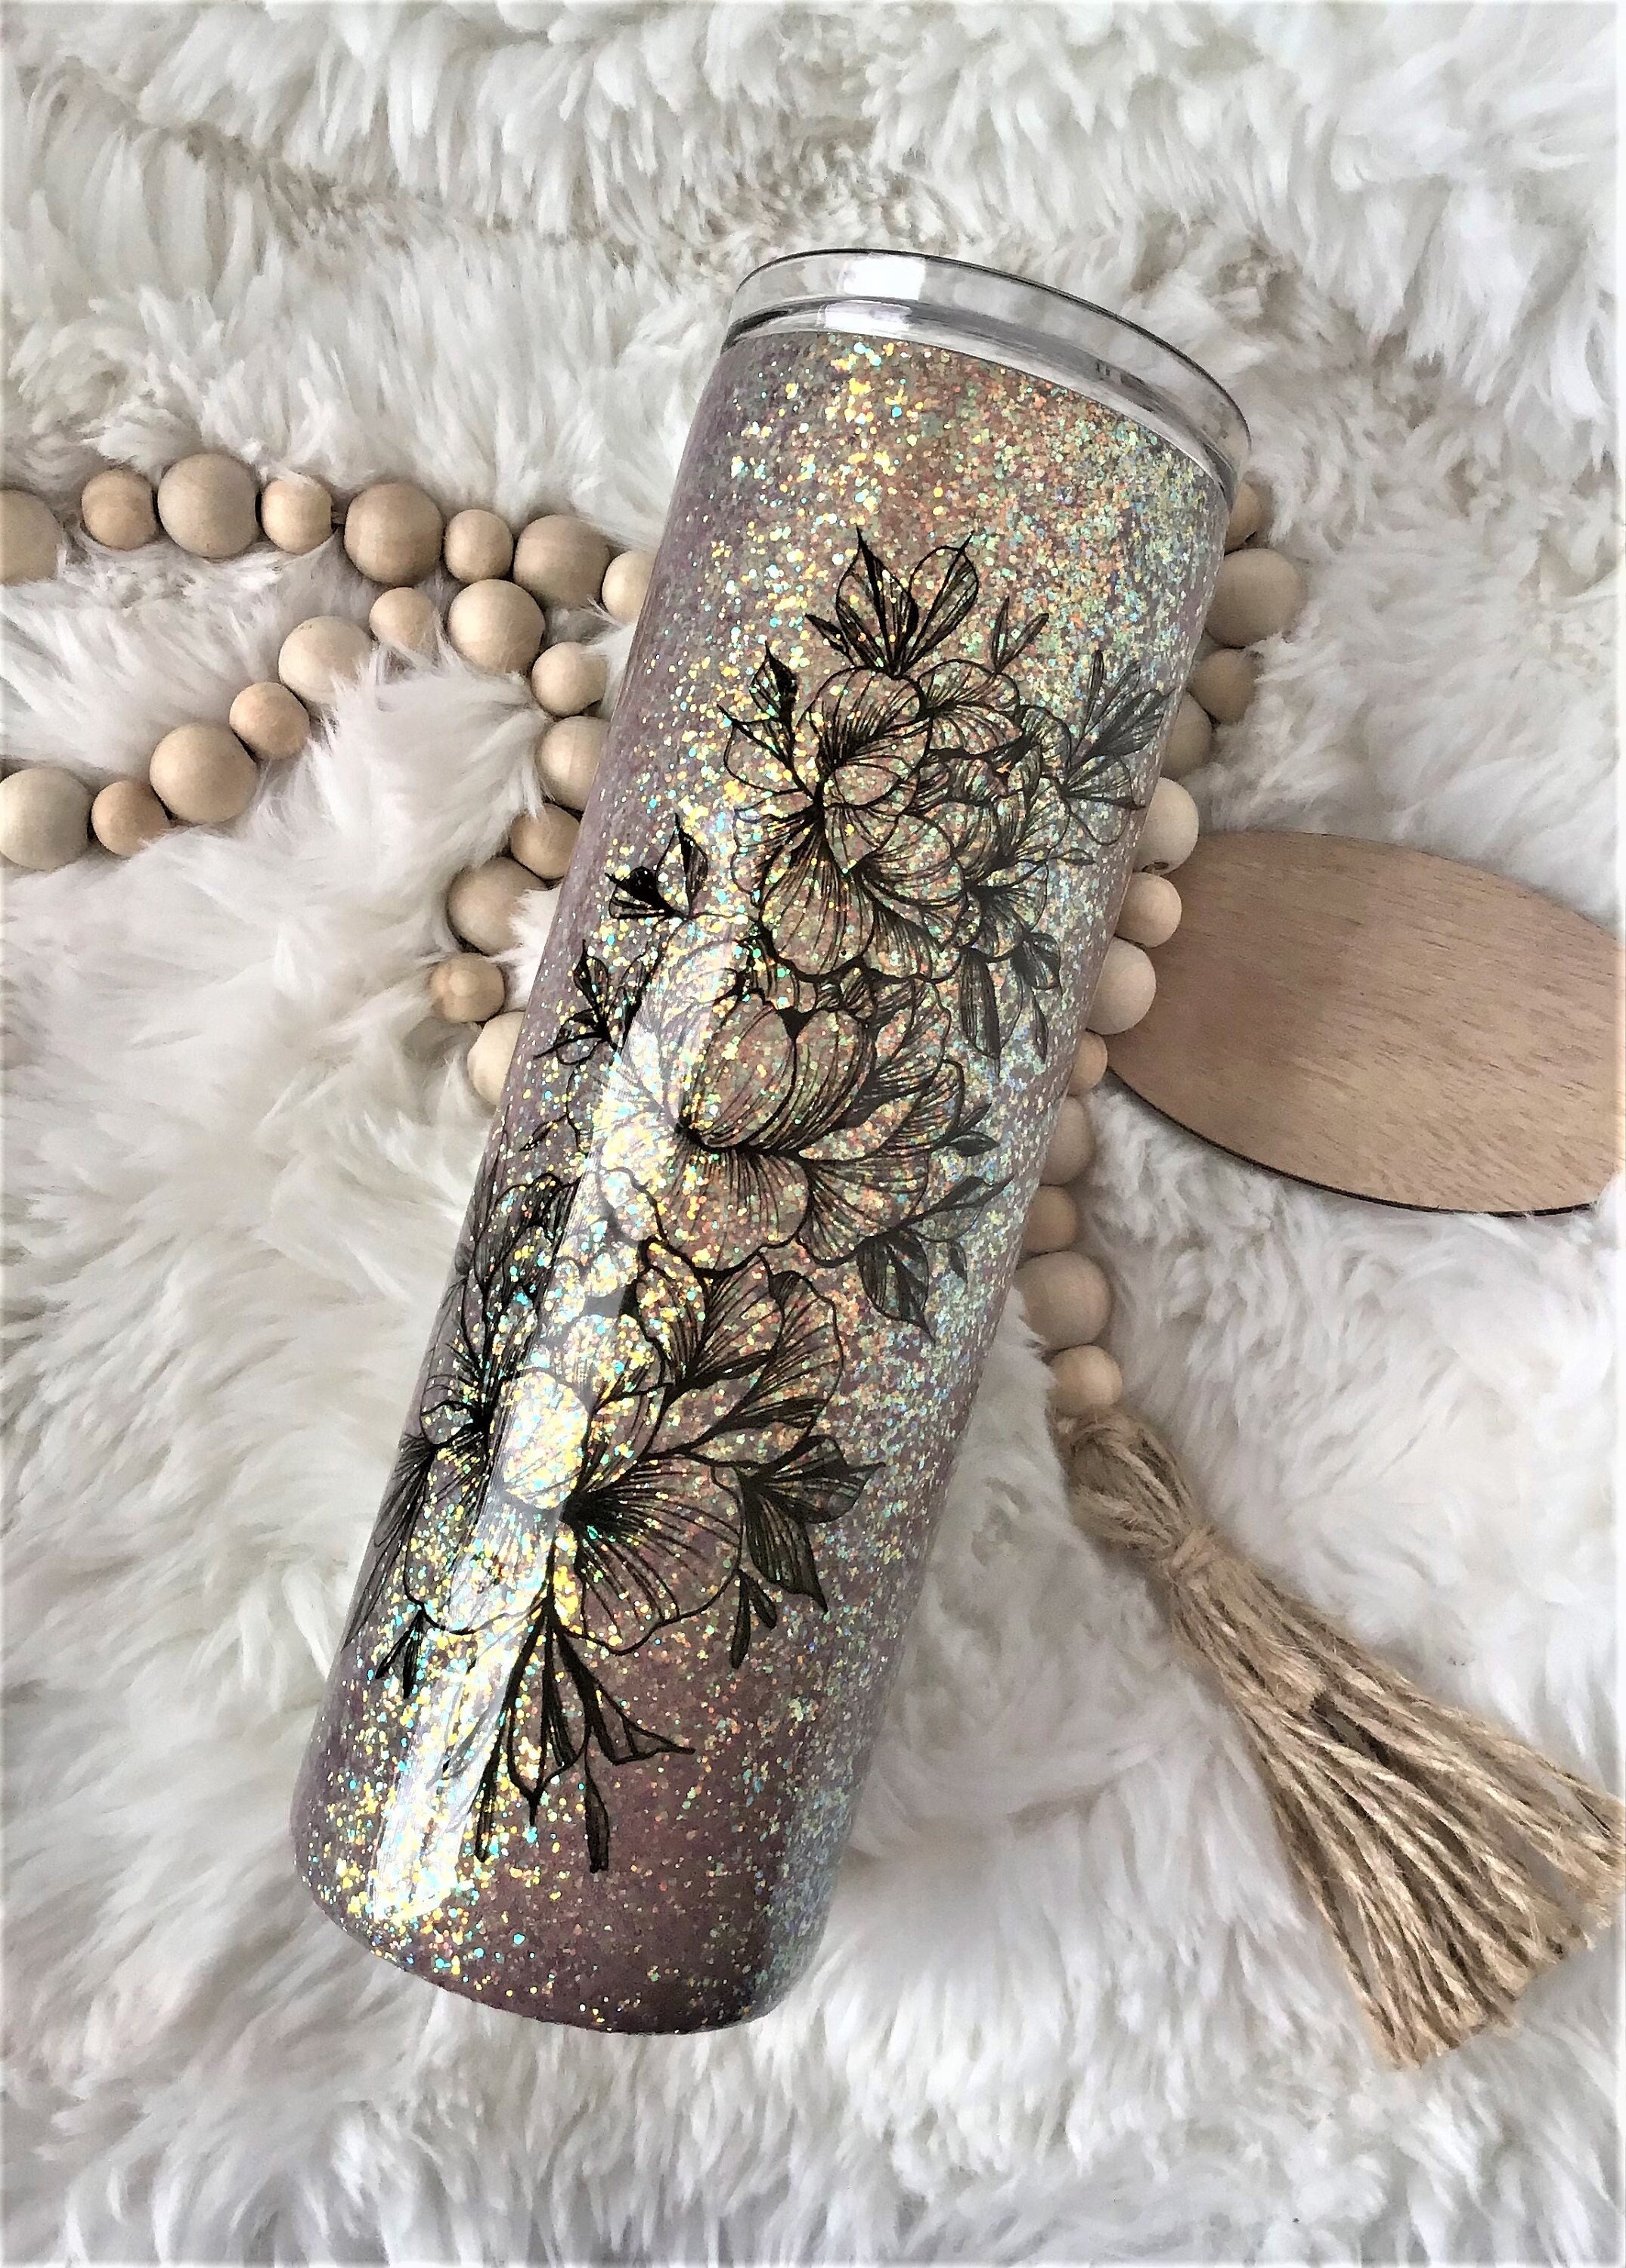 Blush Glam Double Walled Glitter Tumbler - Silver